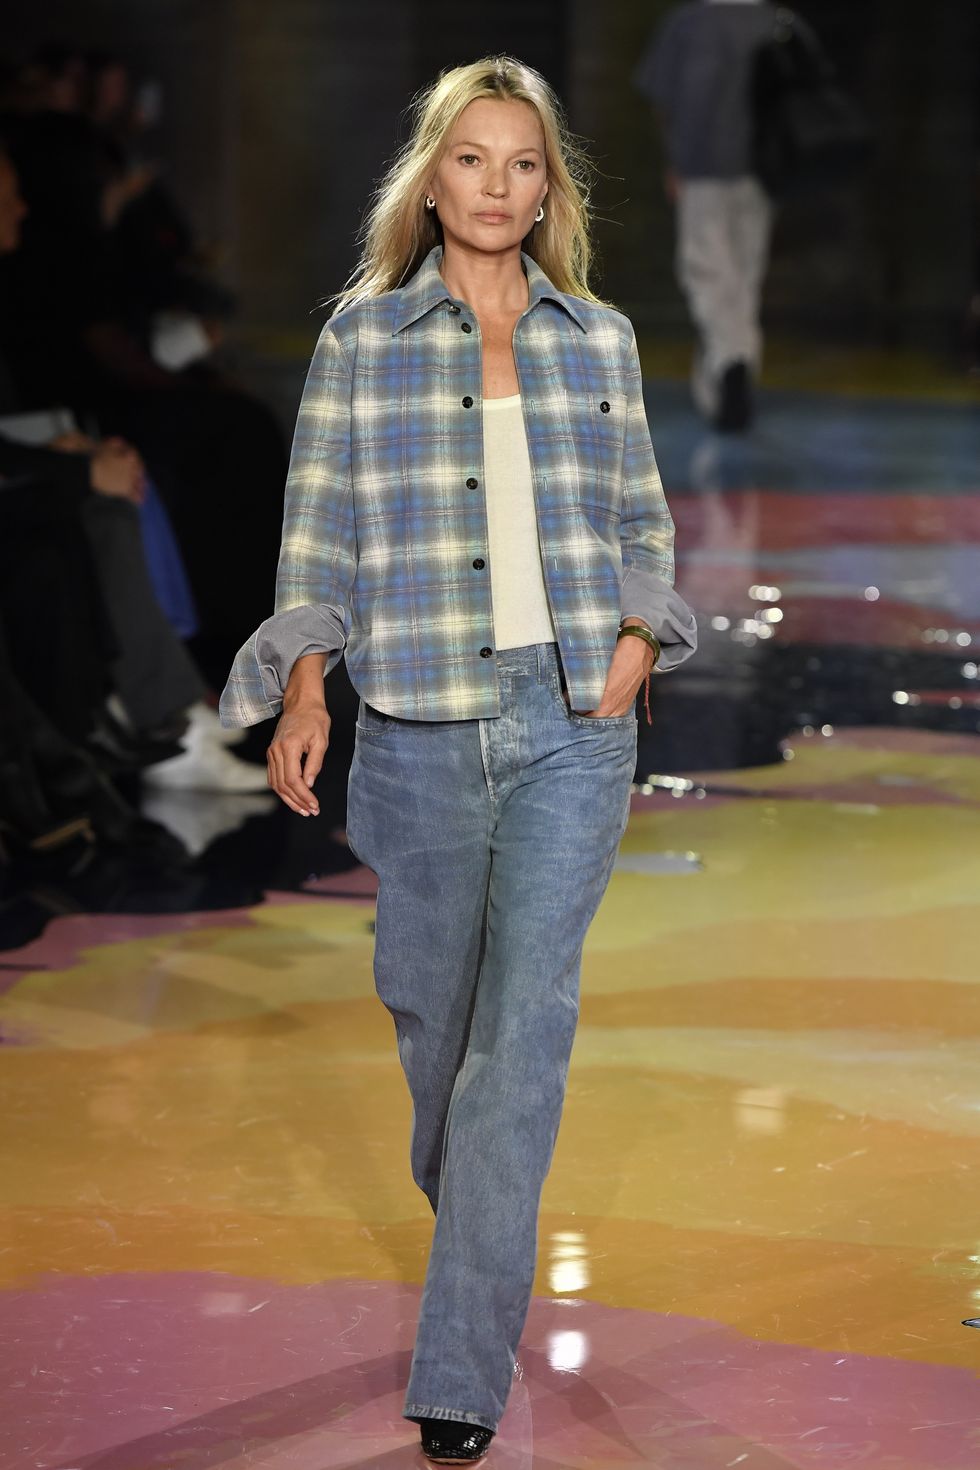 milan, italy septembre 24 kate moss walks the runway during the bottega veneta ready to wear springsummer 2023 fashion show as part of the milan fashion week on september 24, 2022 in milan, italy photo by victor virgilegamma rapho via getty images